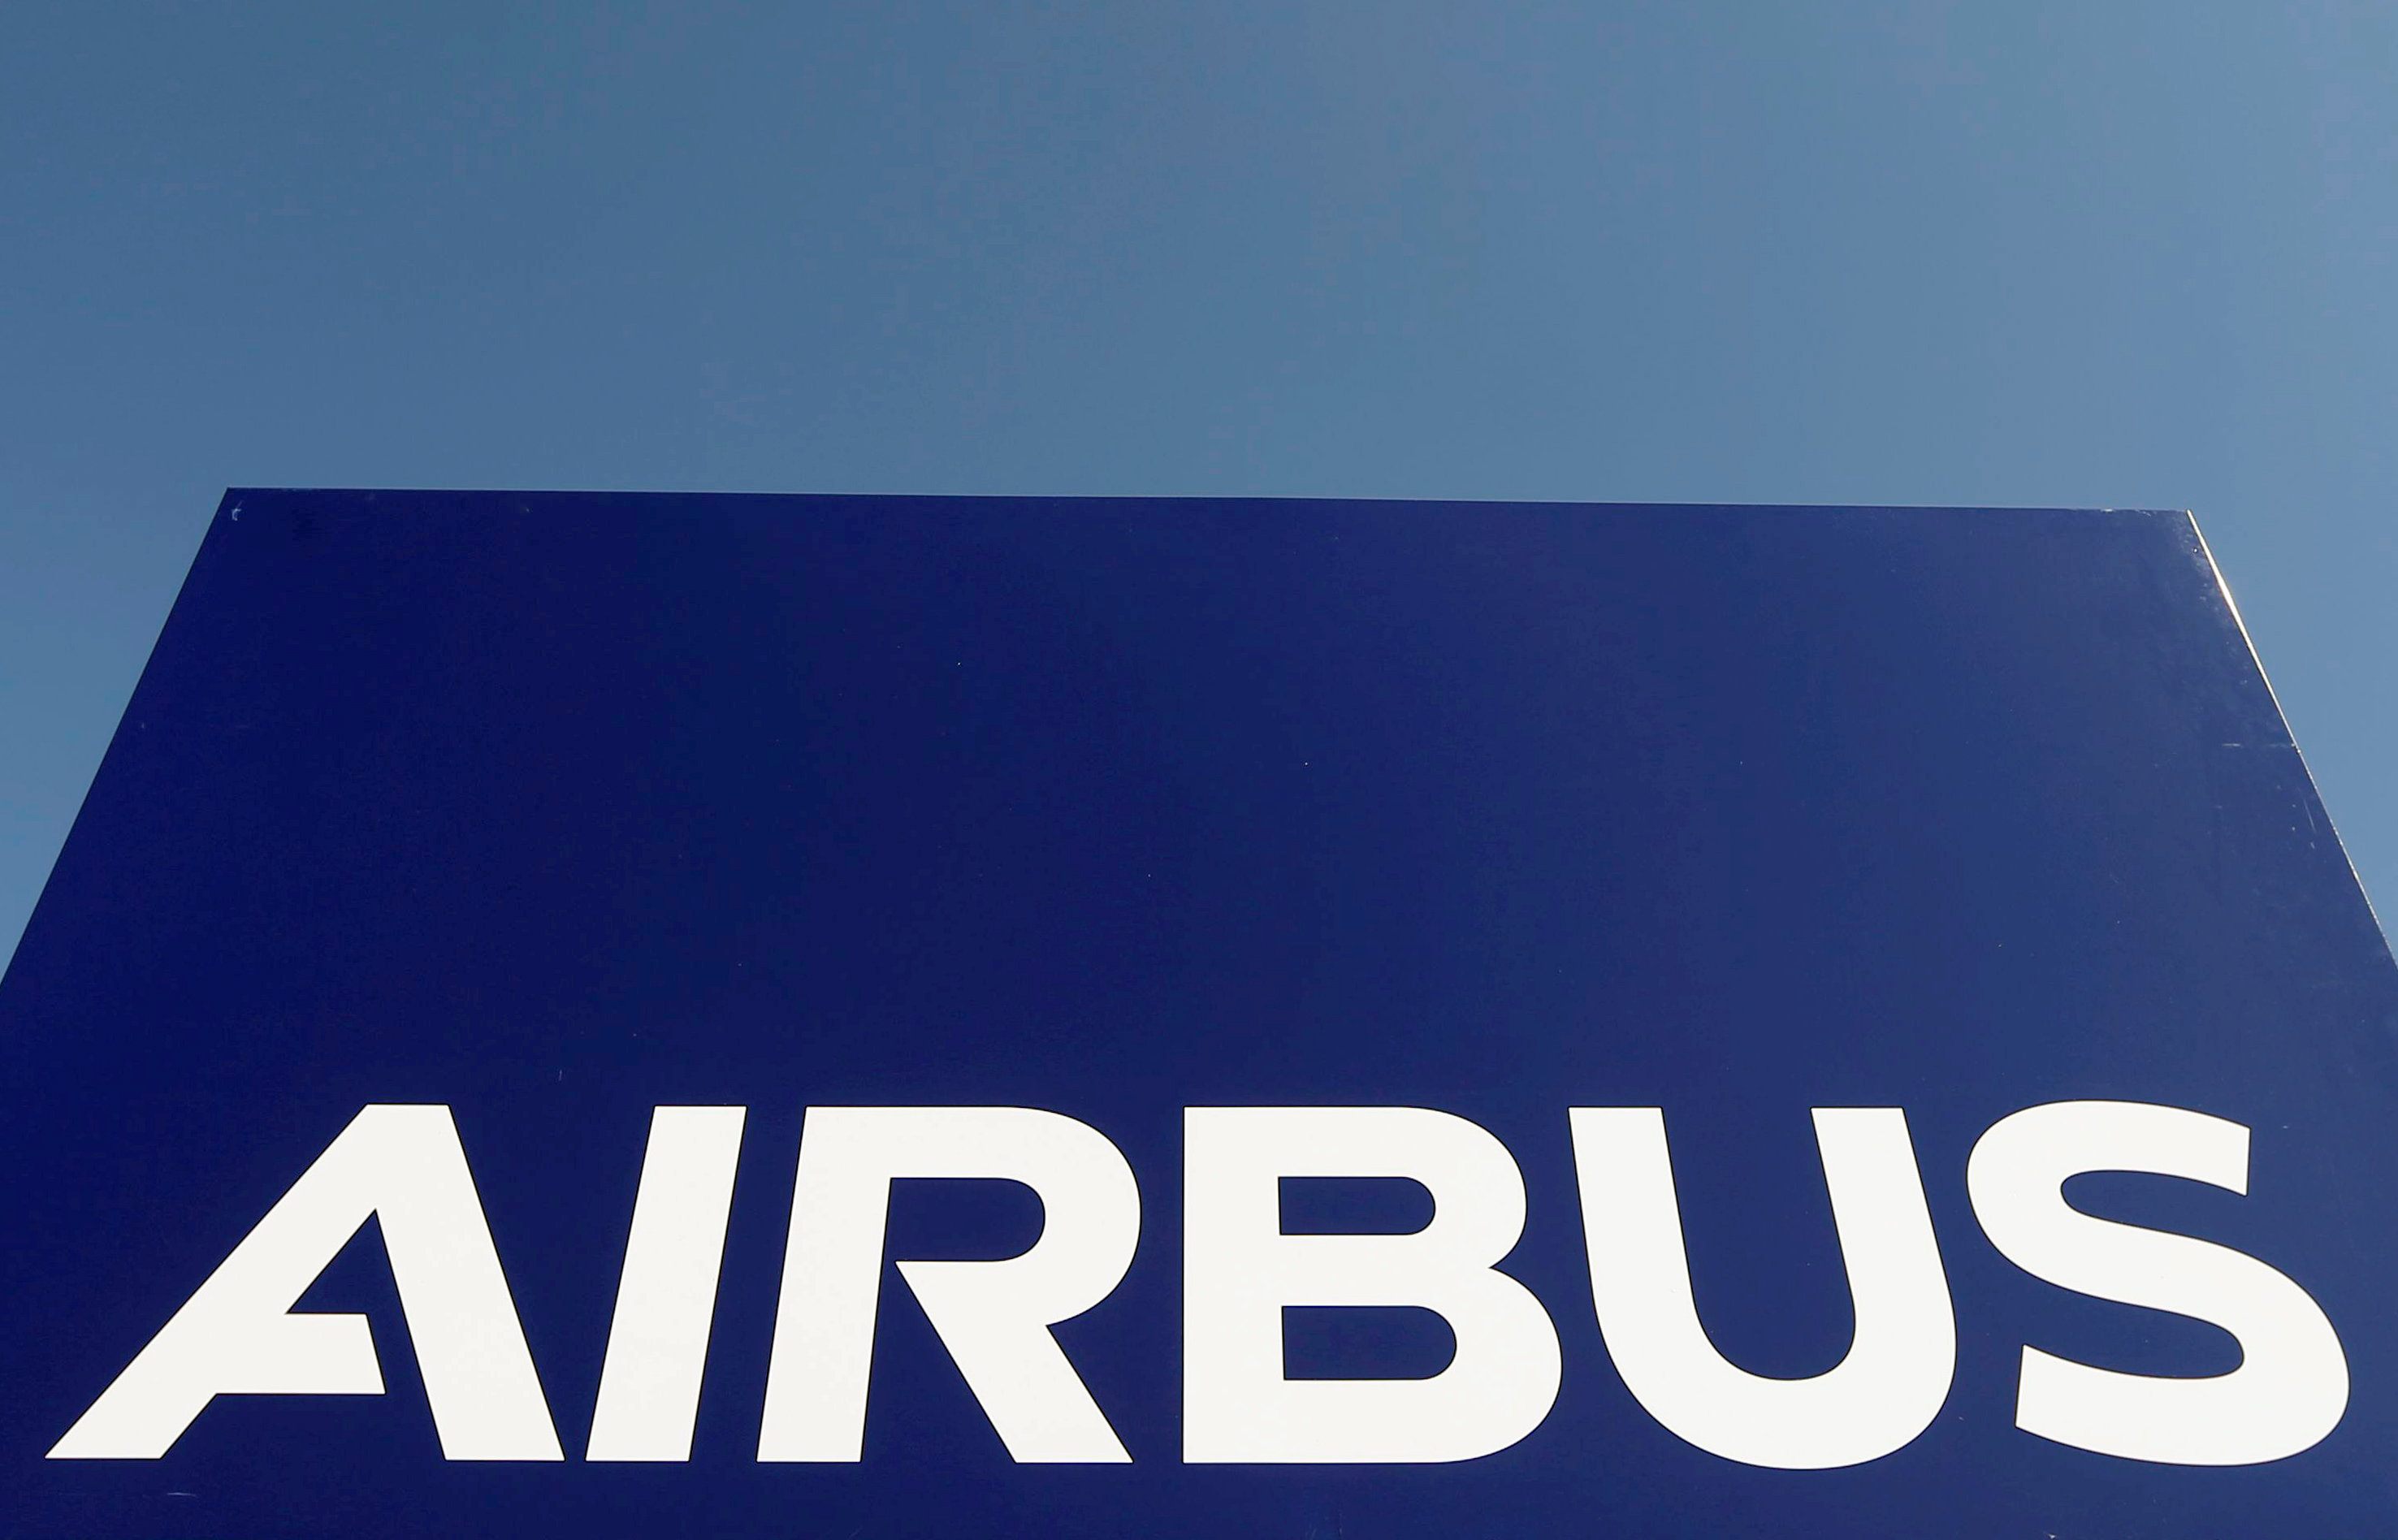 Digital technology to transform jet factories, says Airbus chief